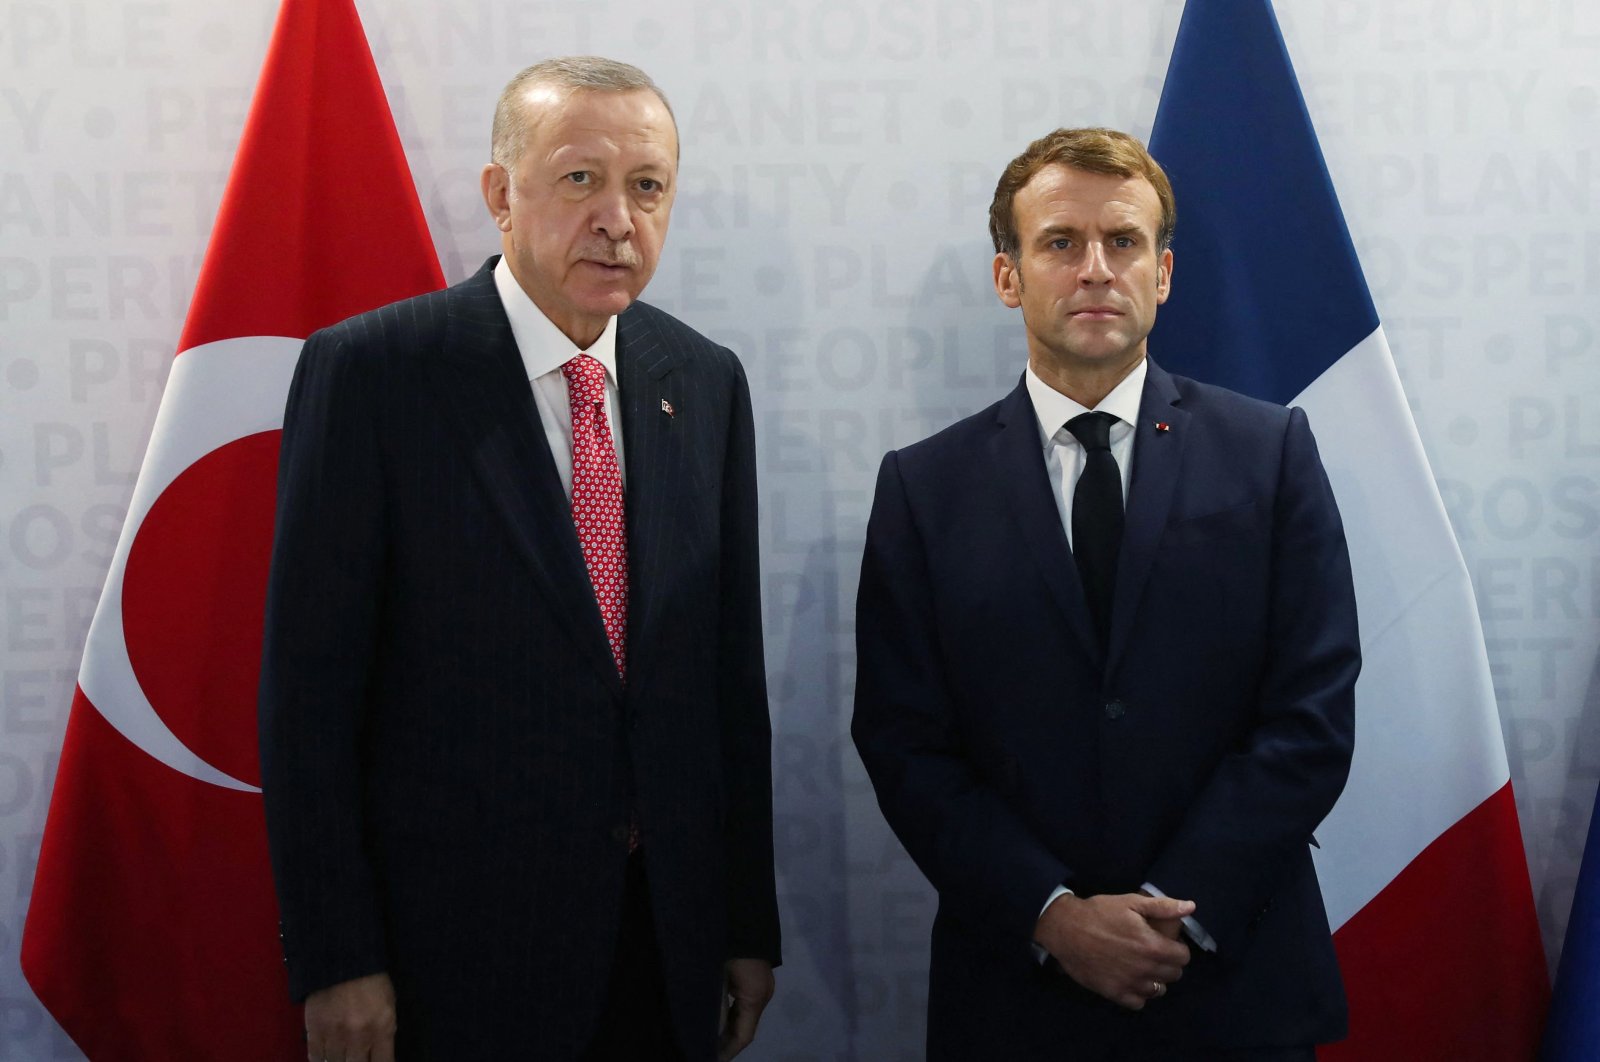 President Recep Tayyip Erdoğan and French President Emmanuel Macron pose before their meeting in Rome, Italy, Oct. 31, 2021. (AFP Photo)